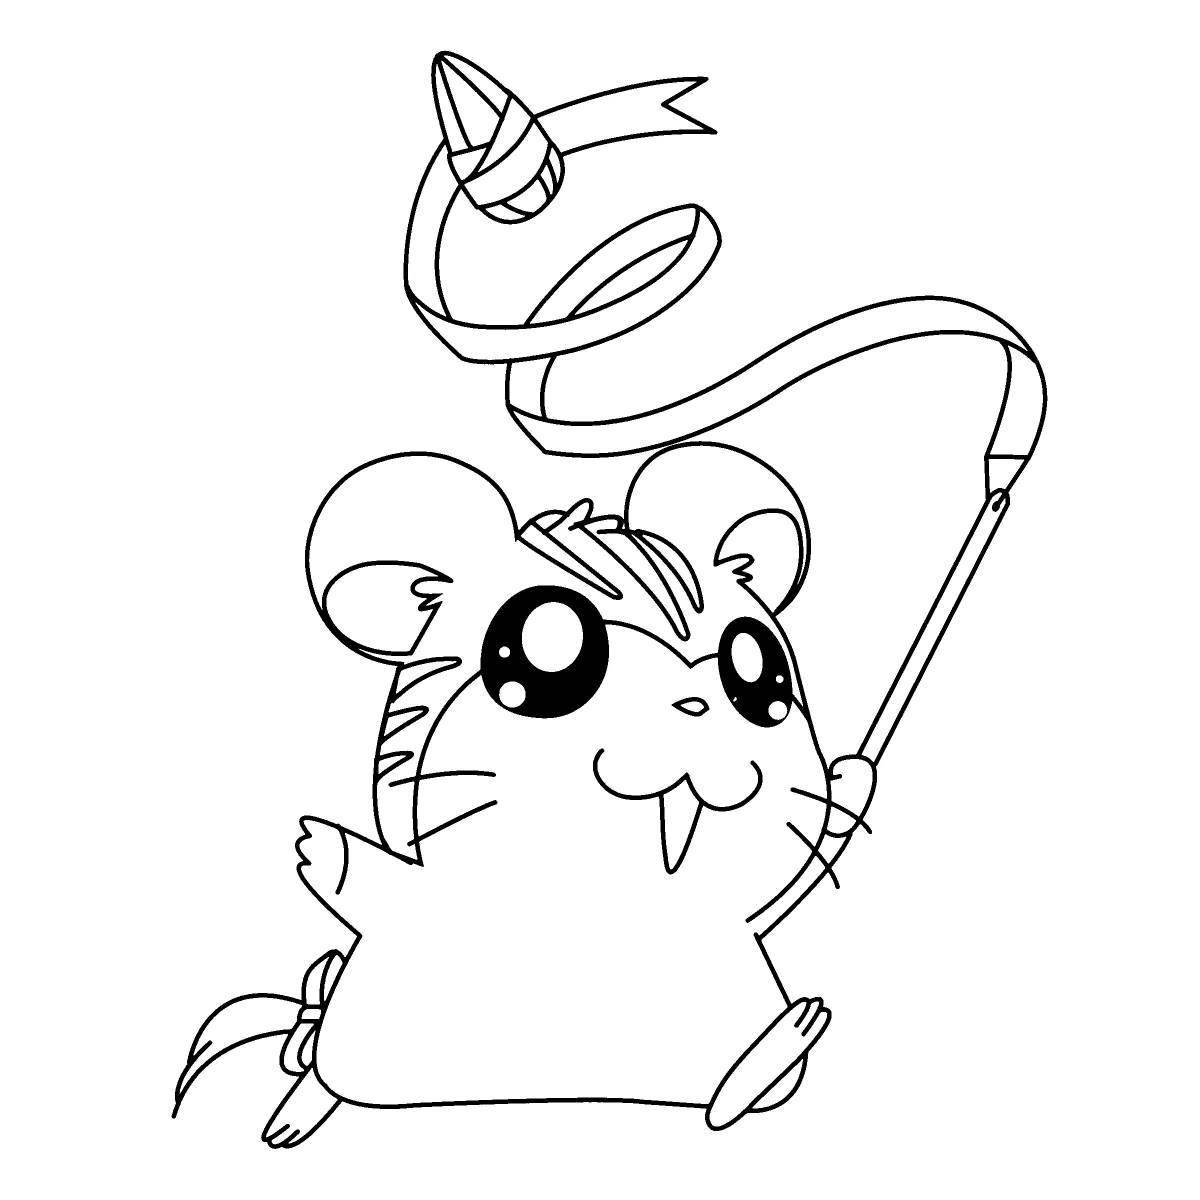 Coloring page funny mouse with glasses